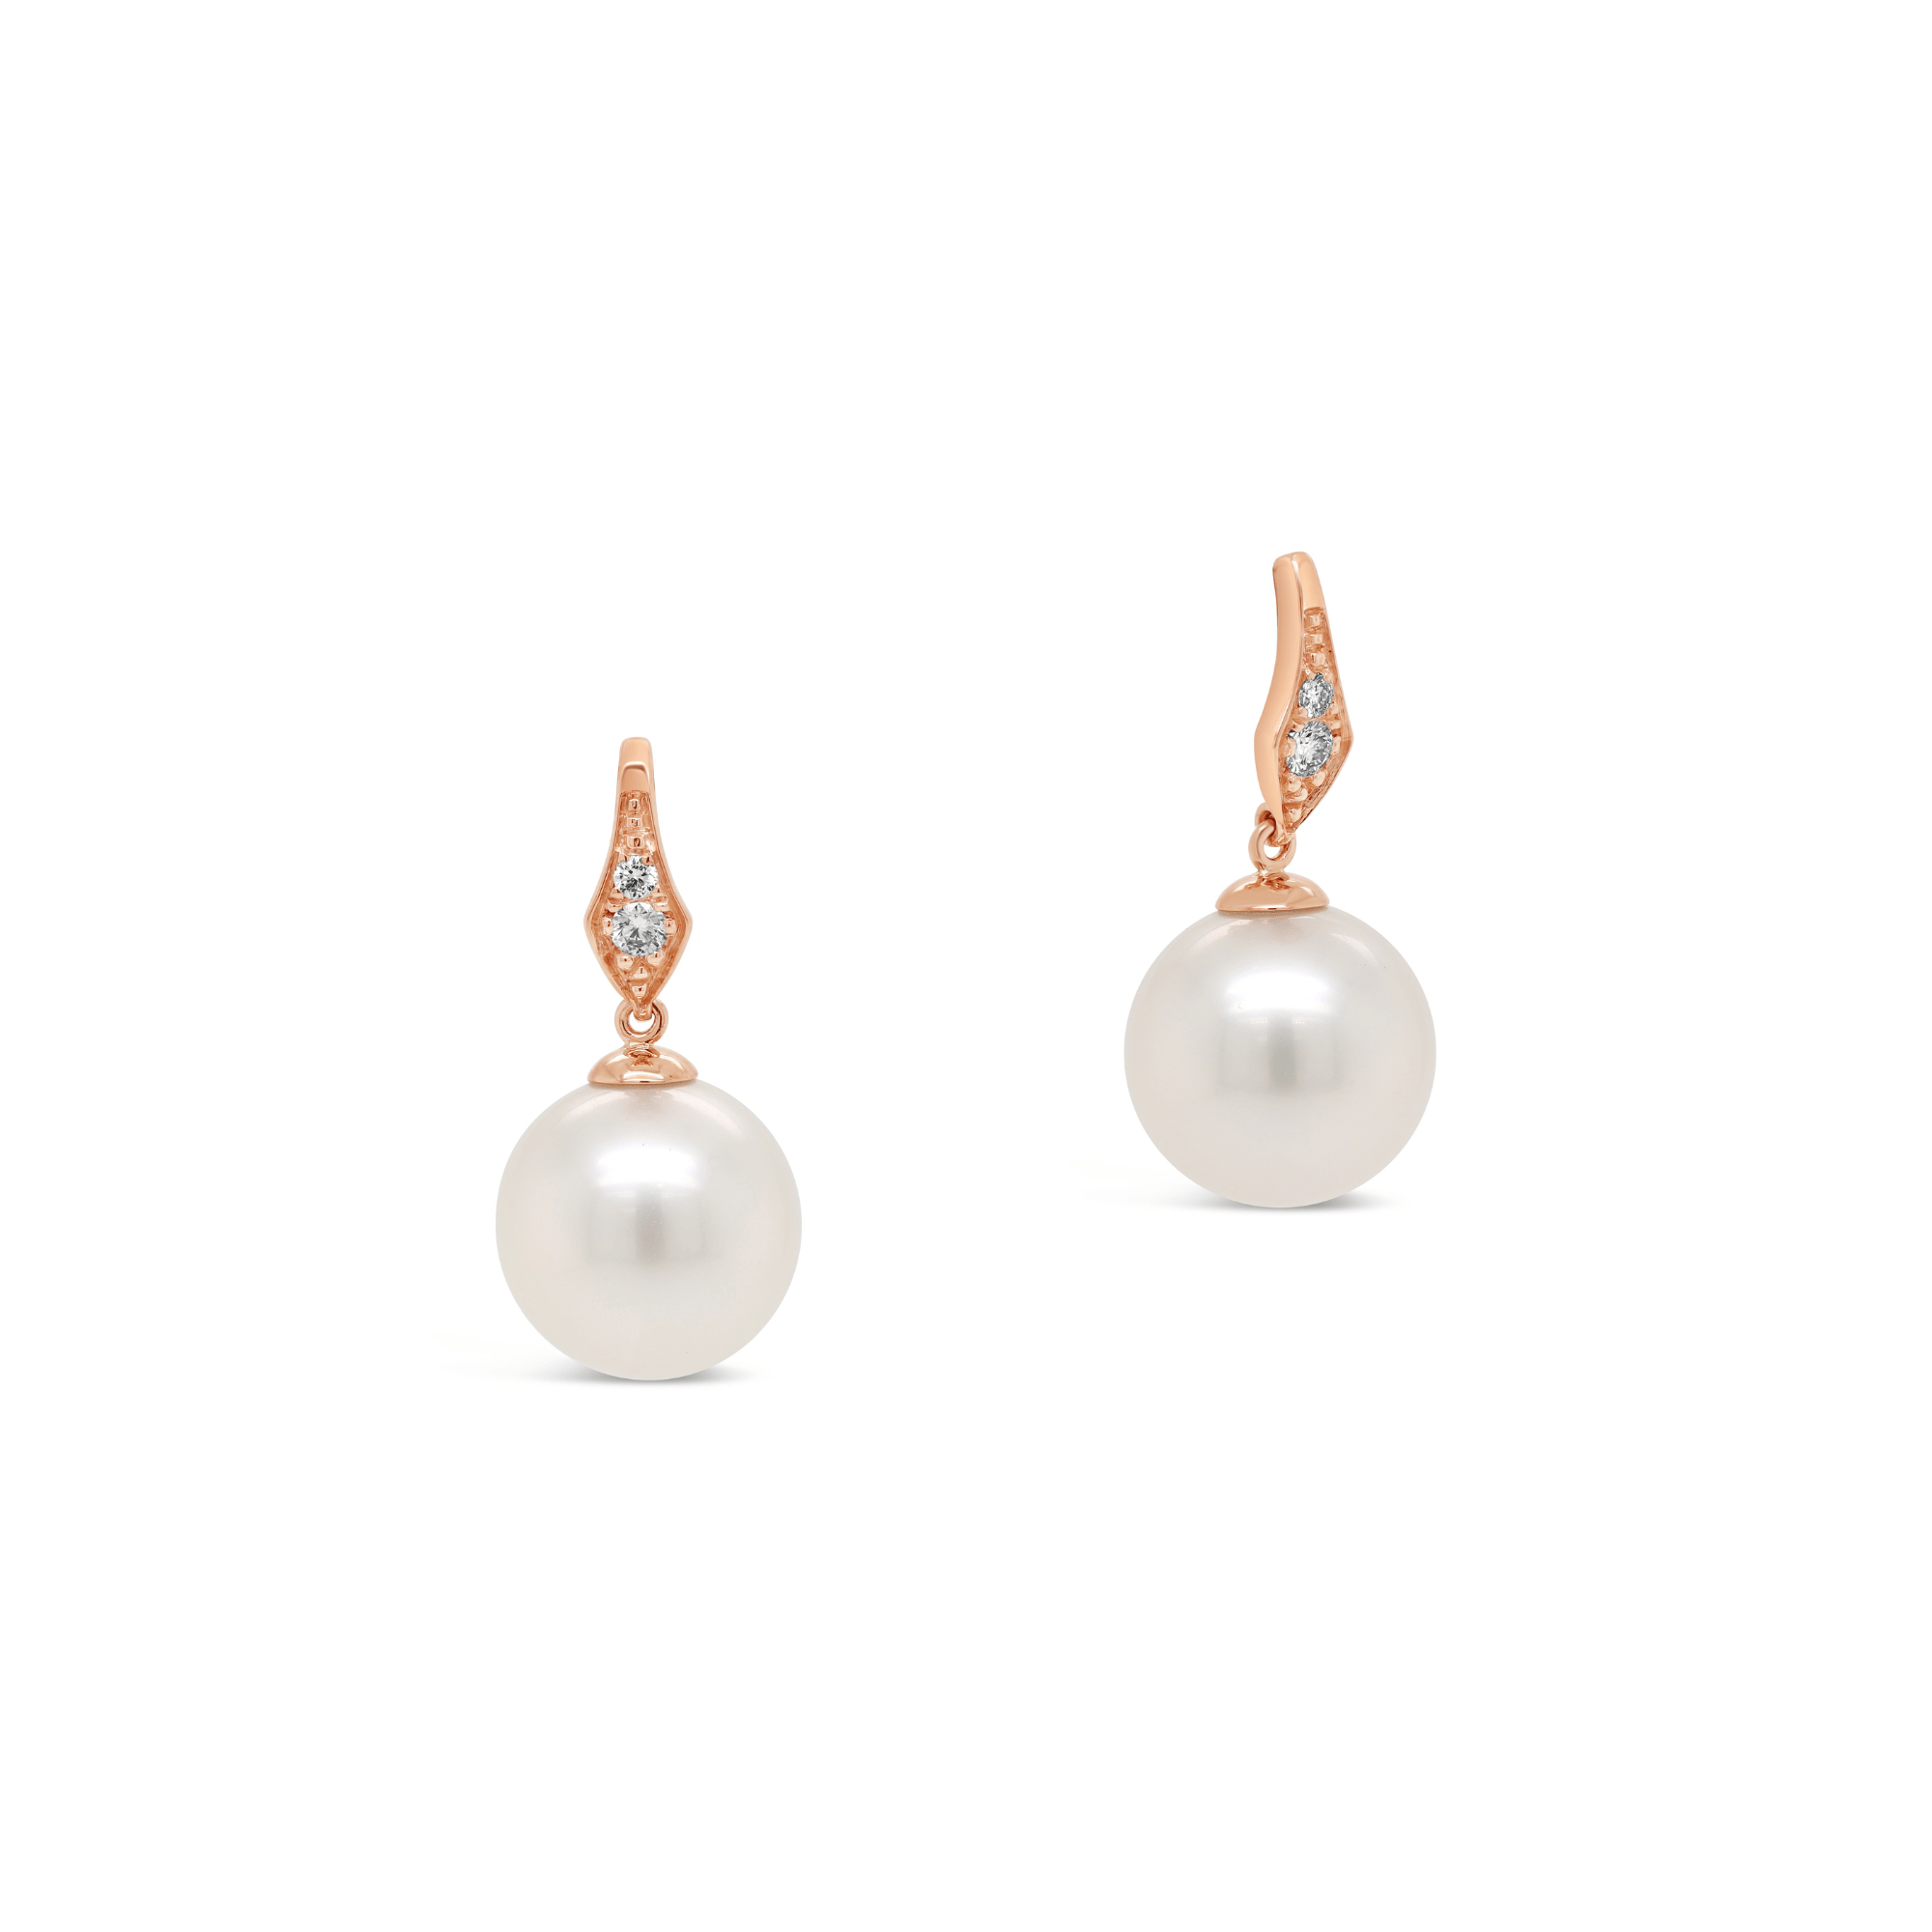 Diamond and South Sea pearl earrings in rose gold